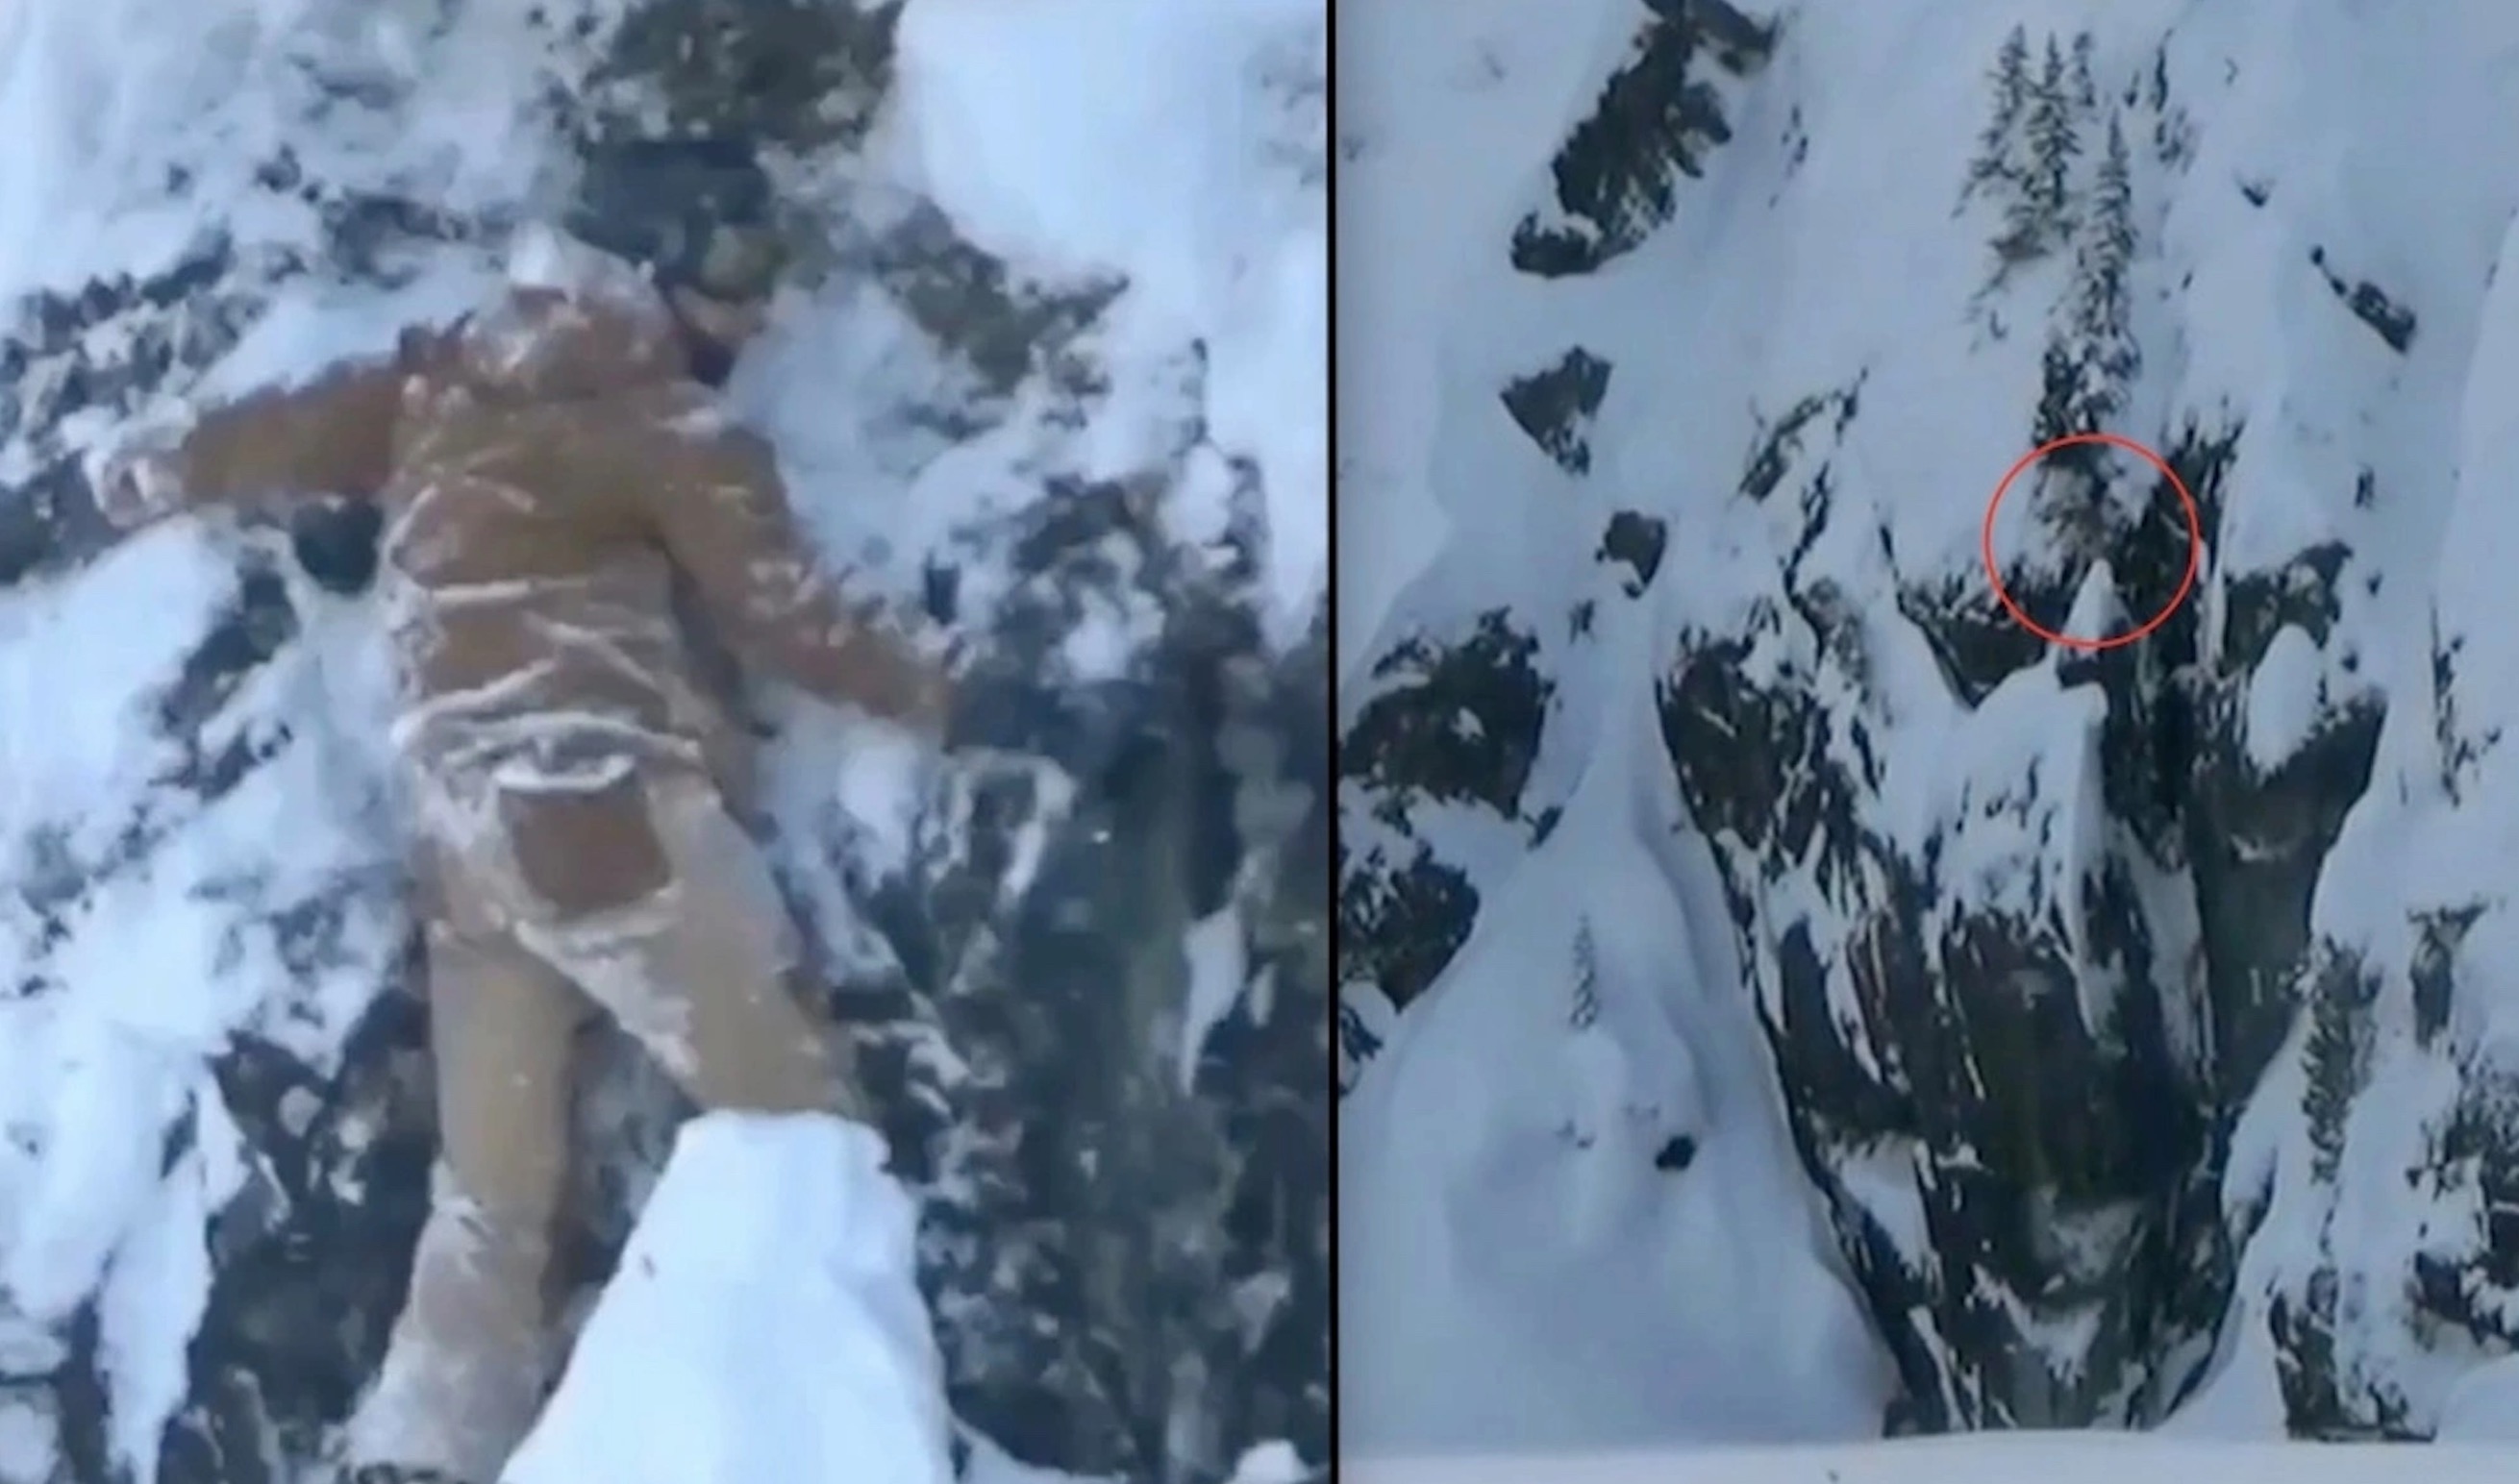 That Time A Snowboarder Was Left Clinging To Cliff Face @ Whistler Blackcomb Ski Resort